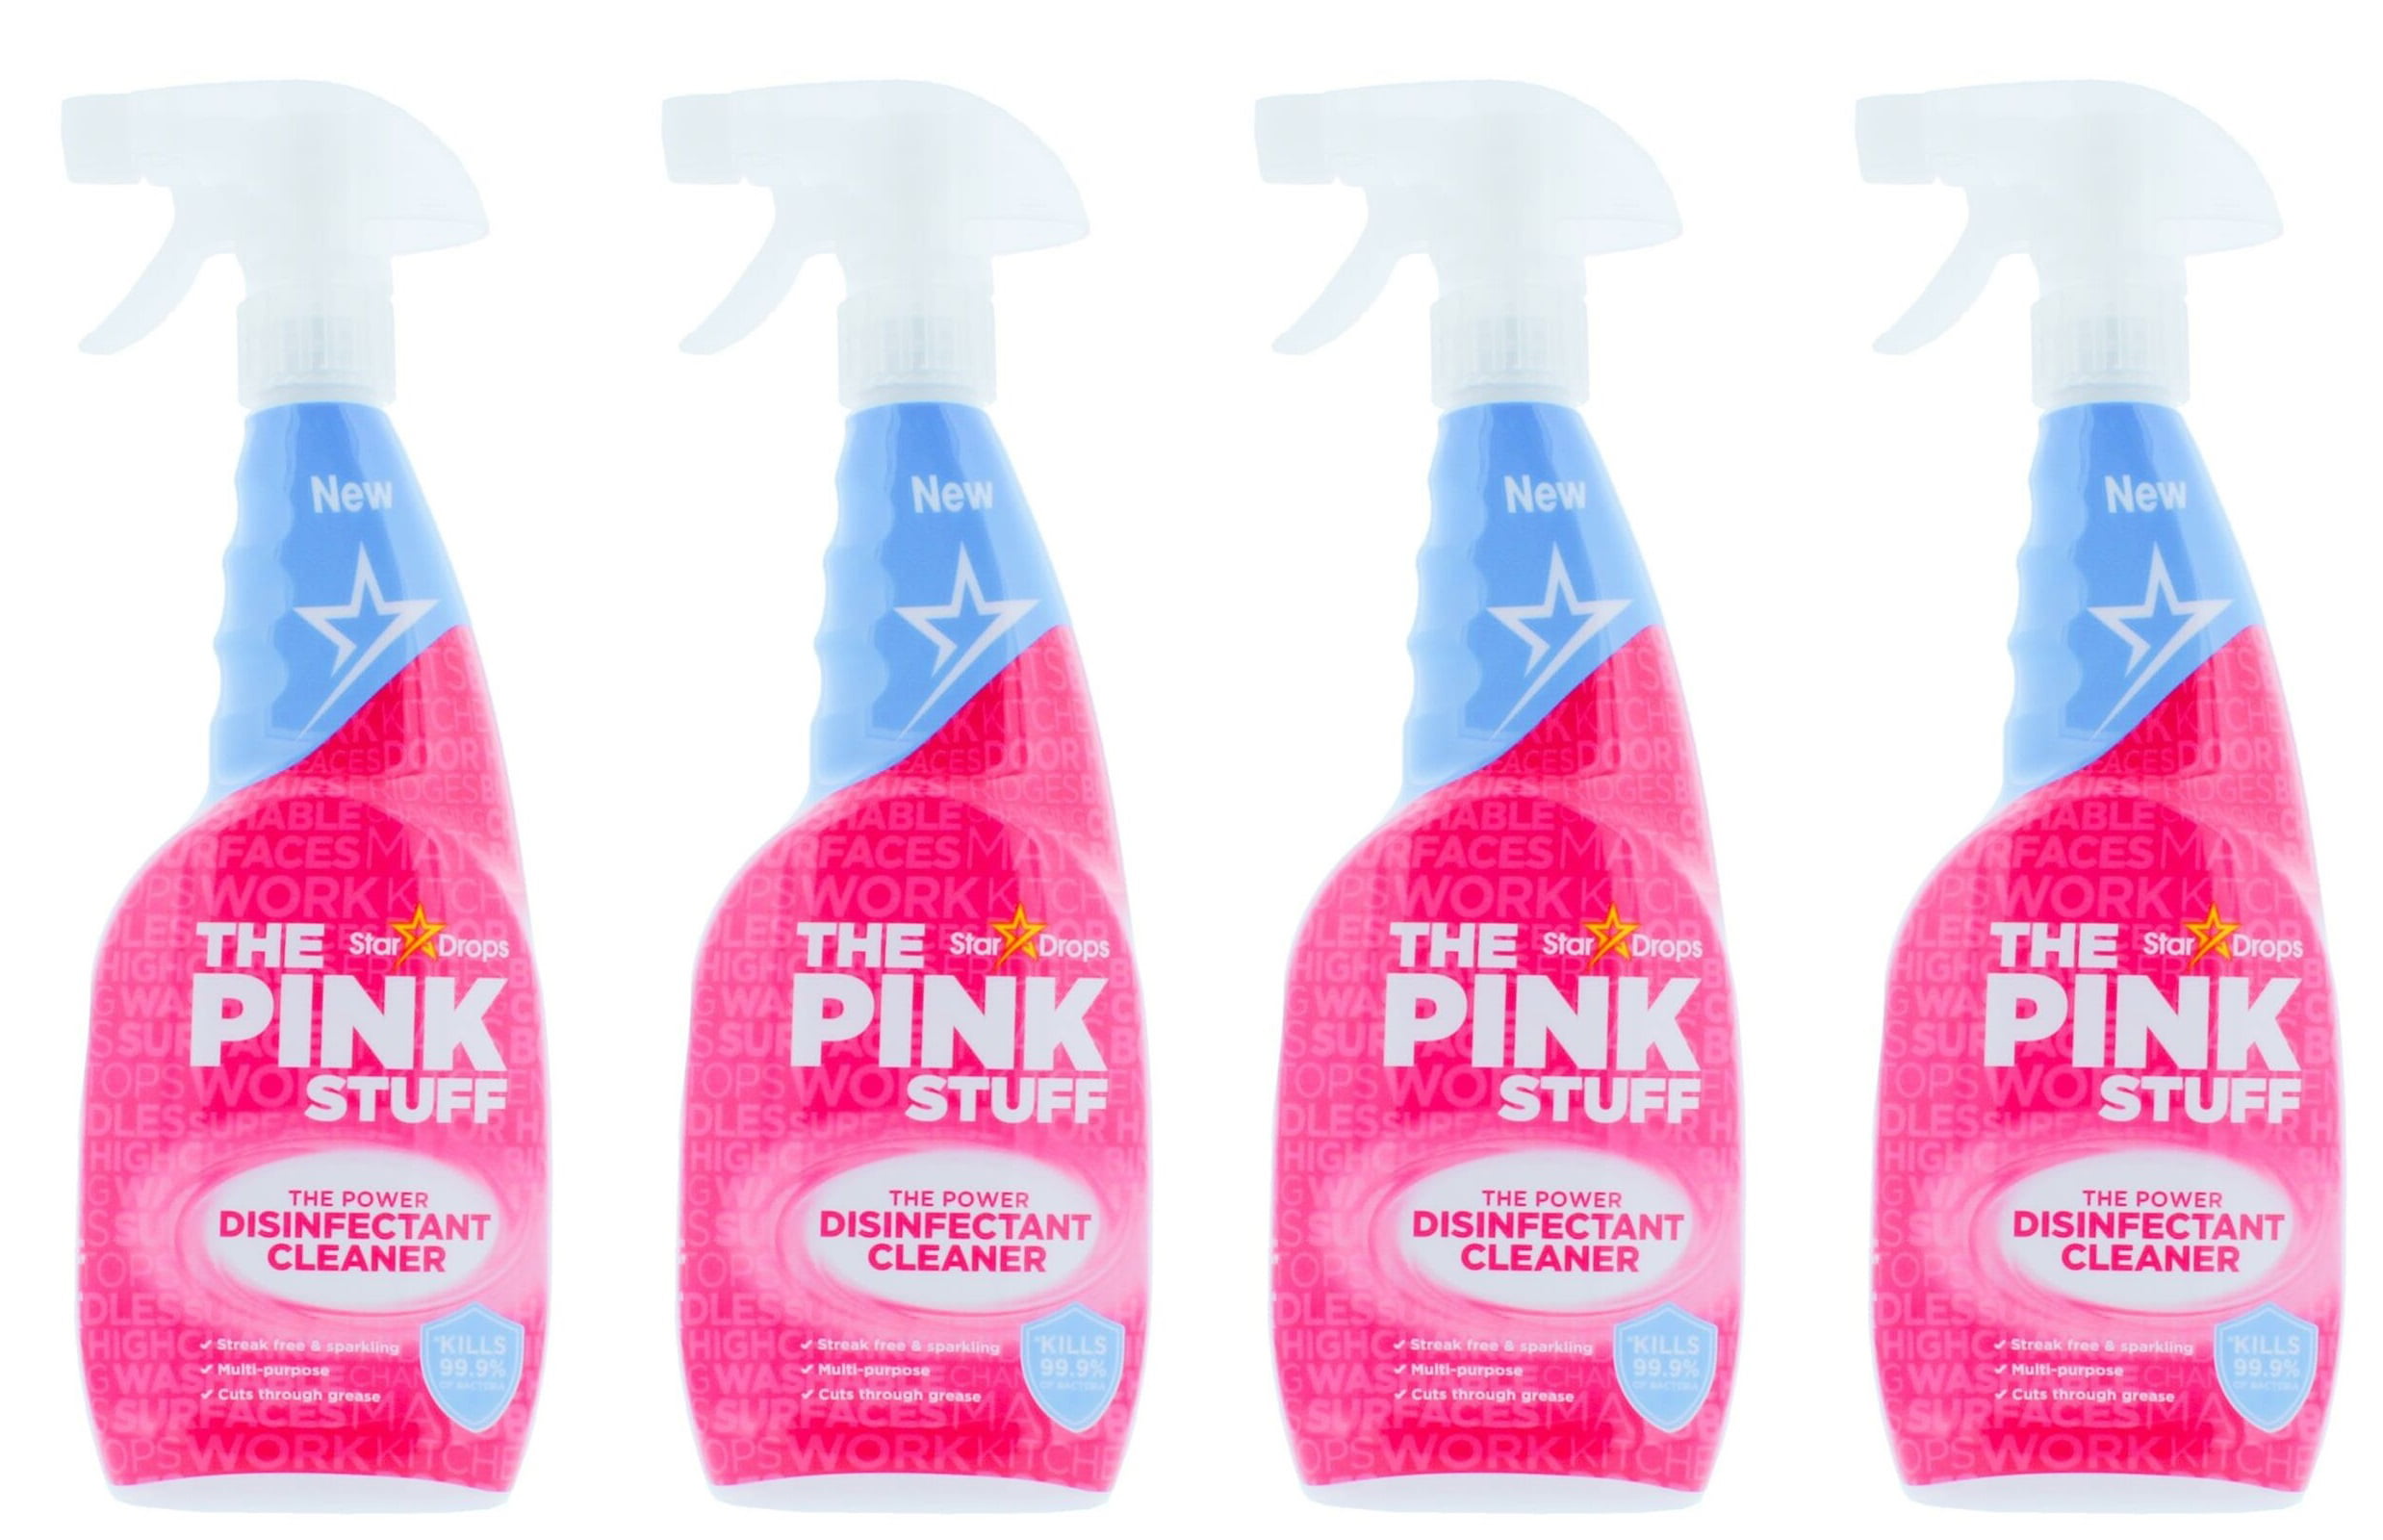 Not Your Mom's Cleaning - Are you Team Pink Stuff or Team Power